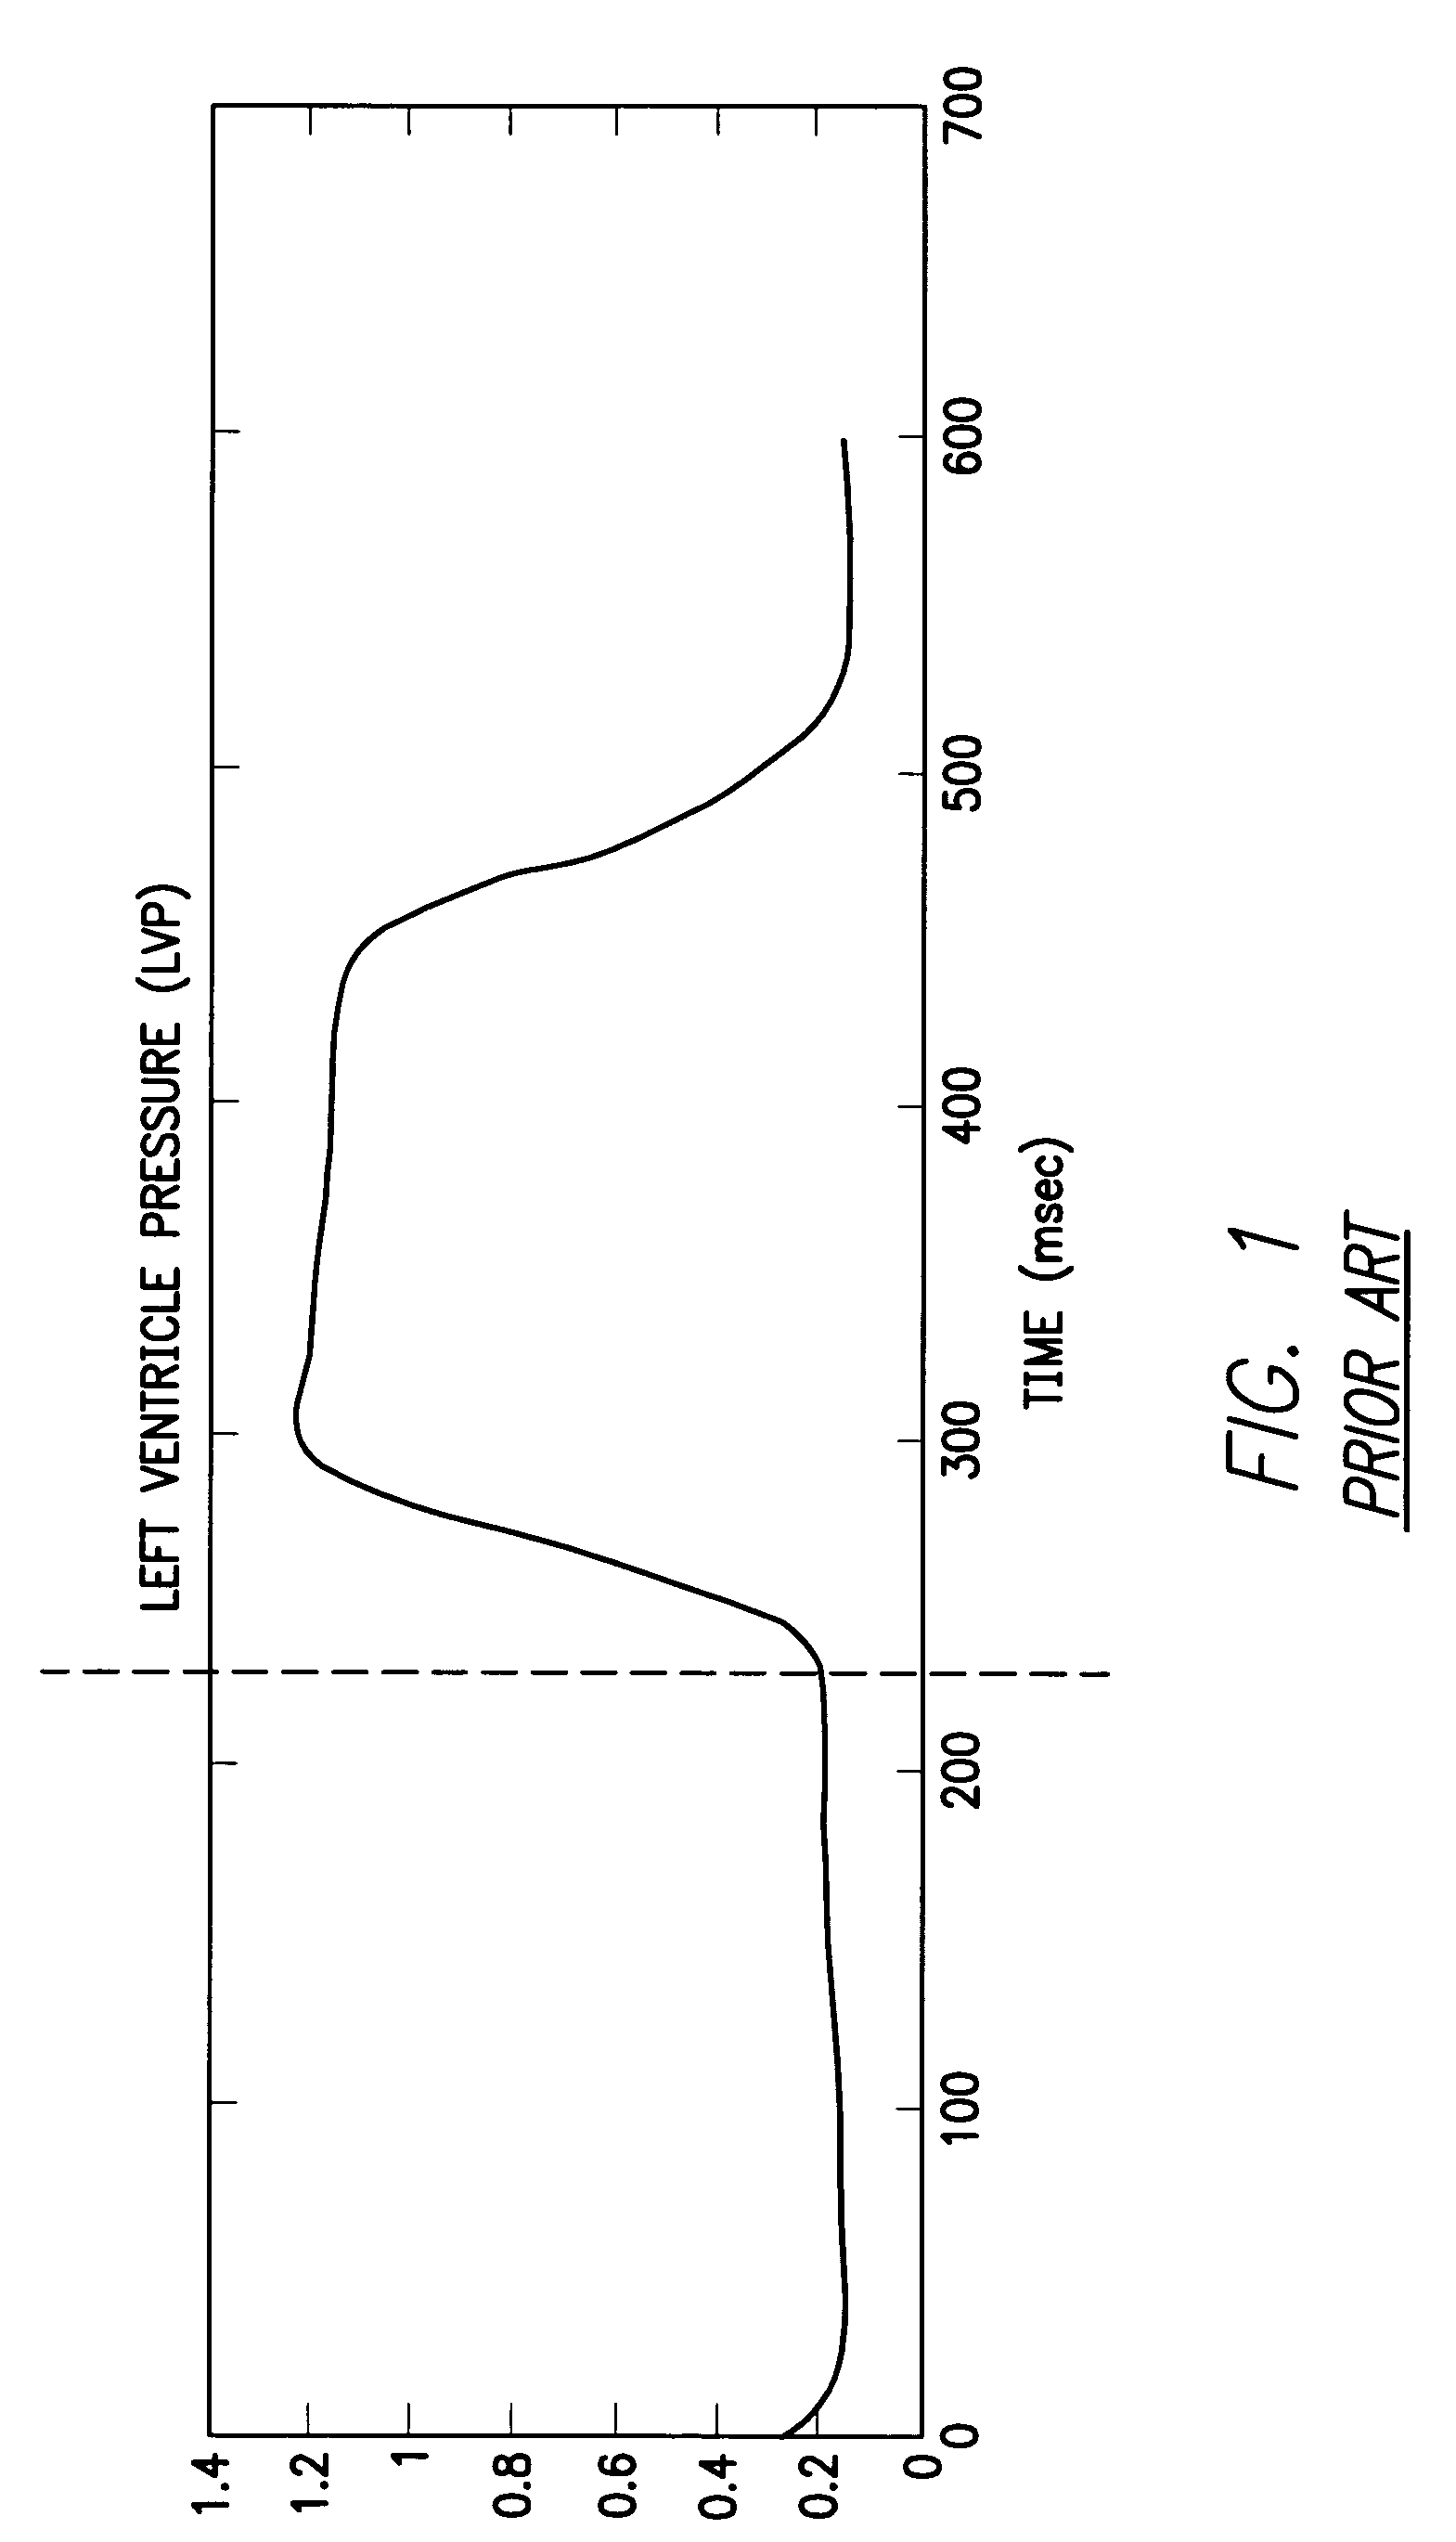 System and method for detecting heart failure and pulmonary edema based on ventricular end-diastolic pressure using an implantable medical device